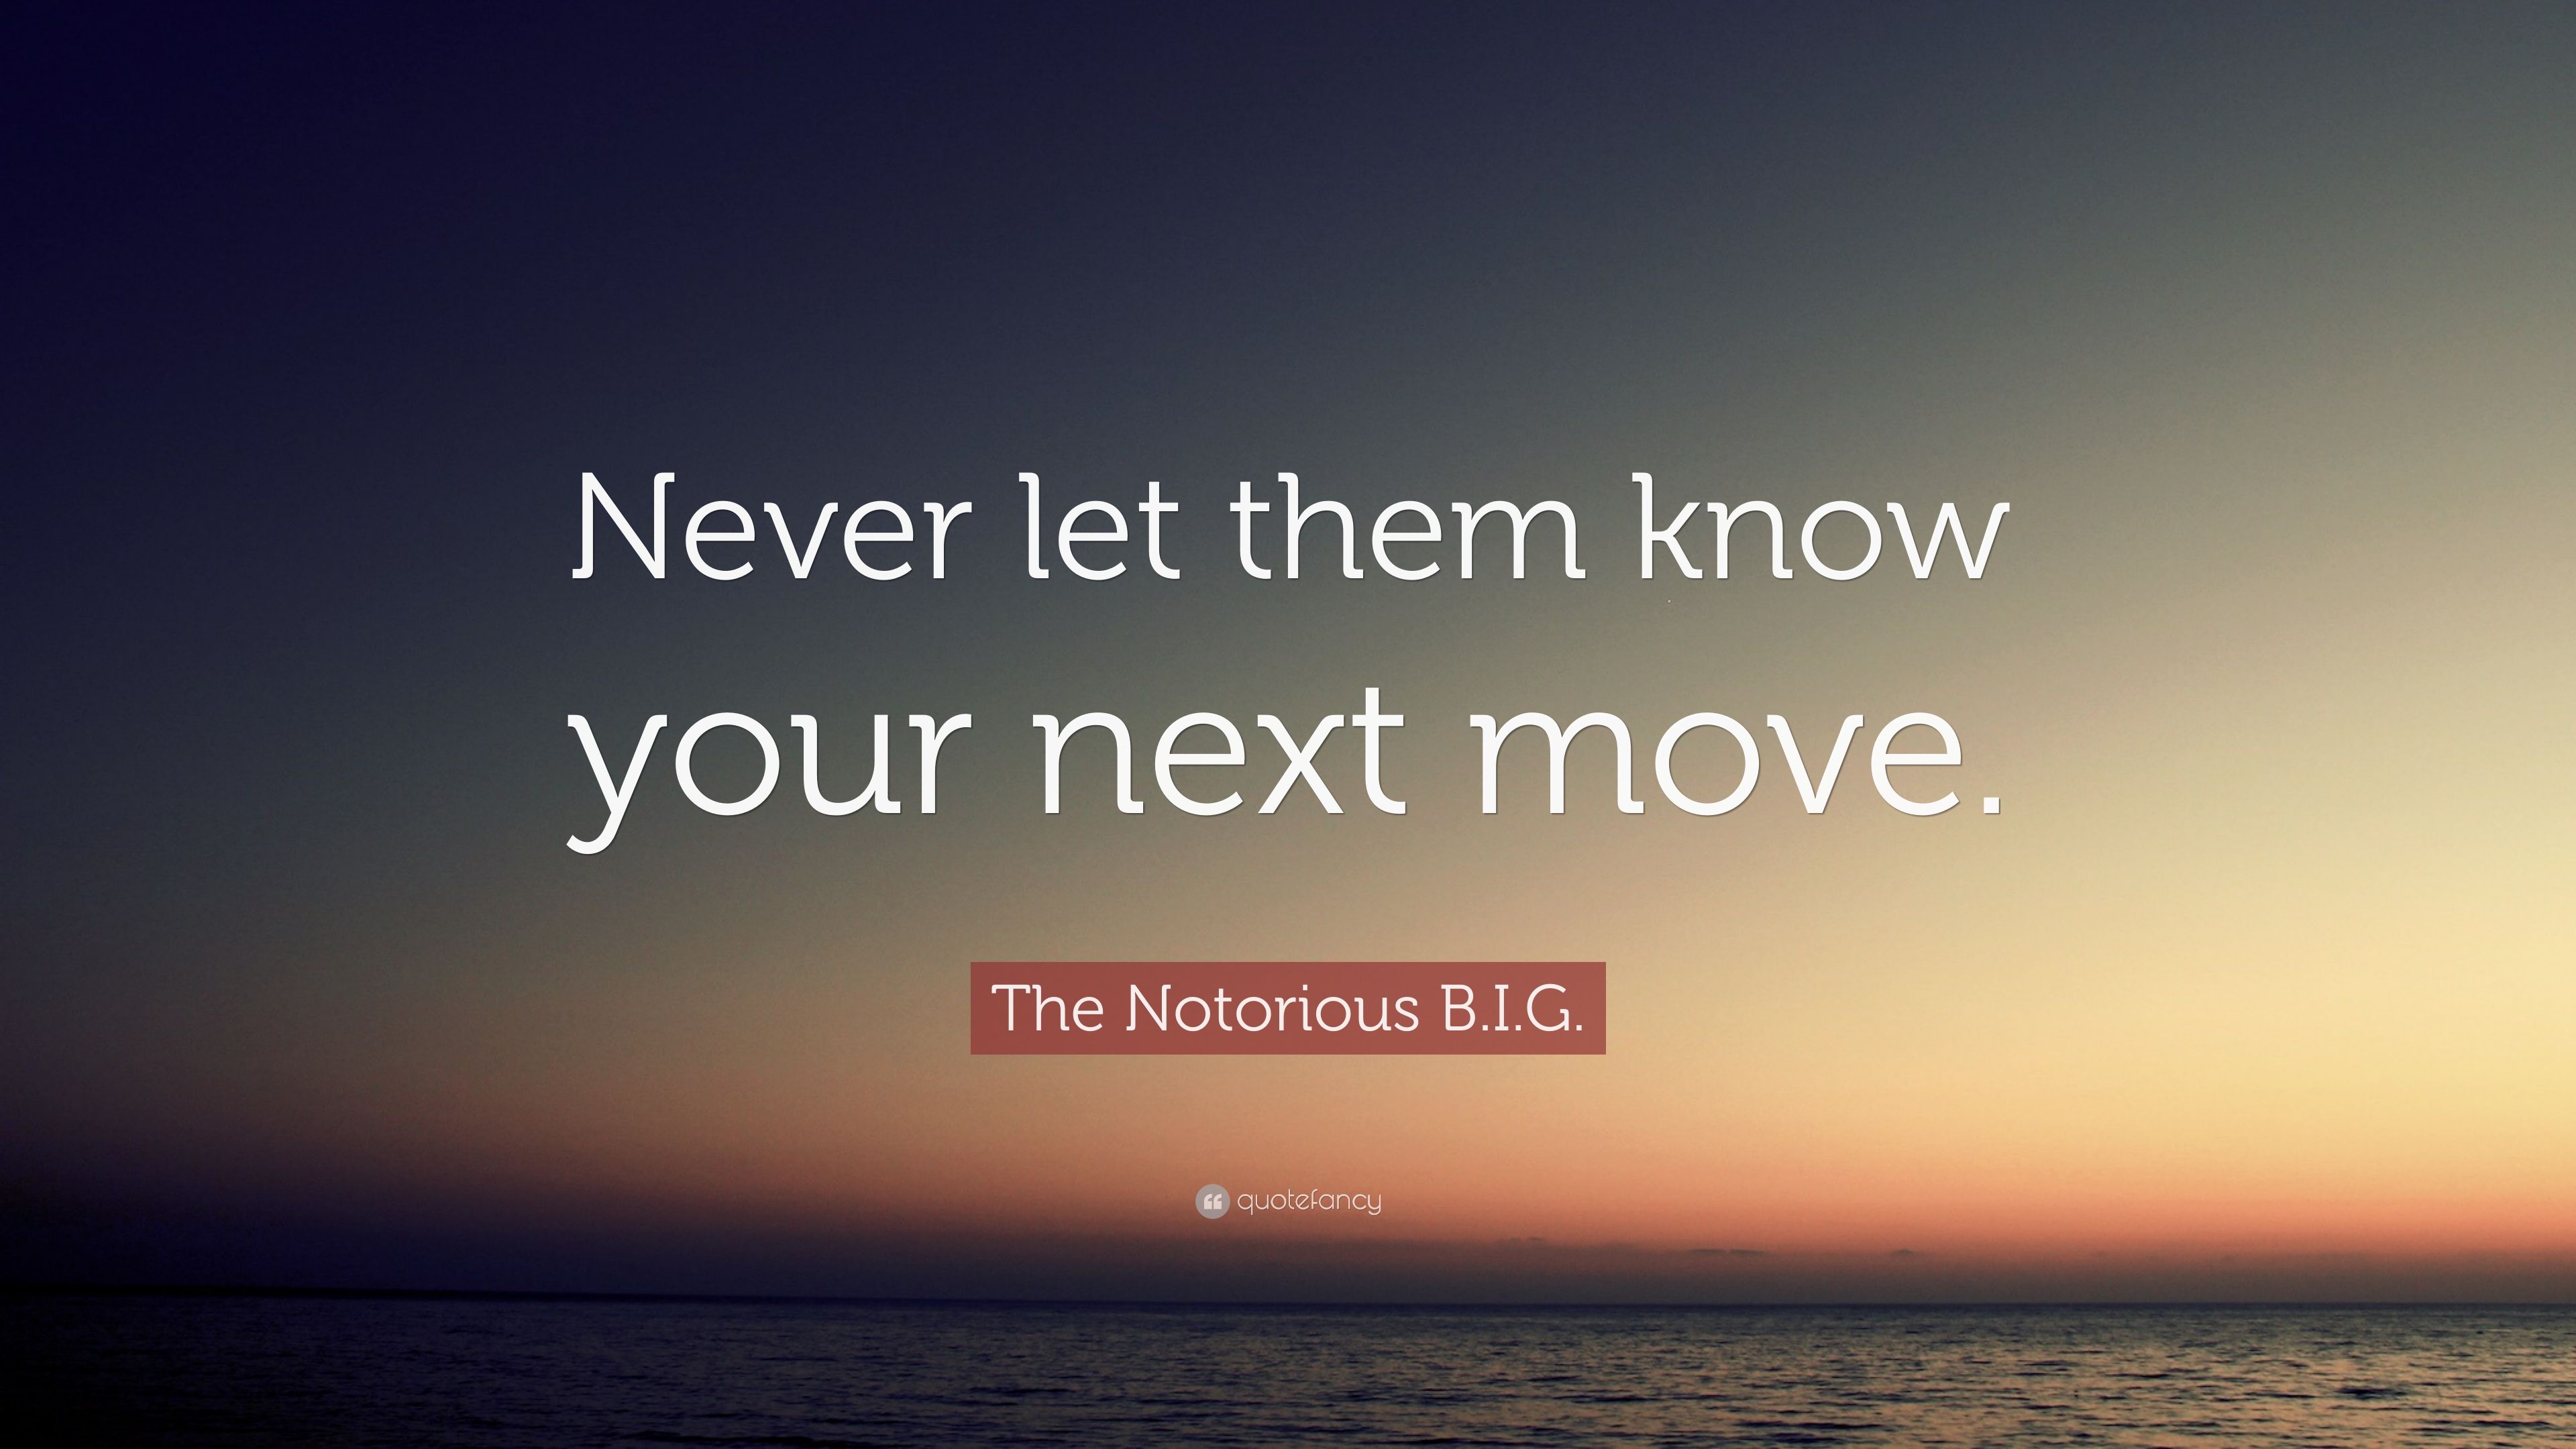 The Notorious B.I.G. Quote: “Never let them know your next move